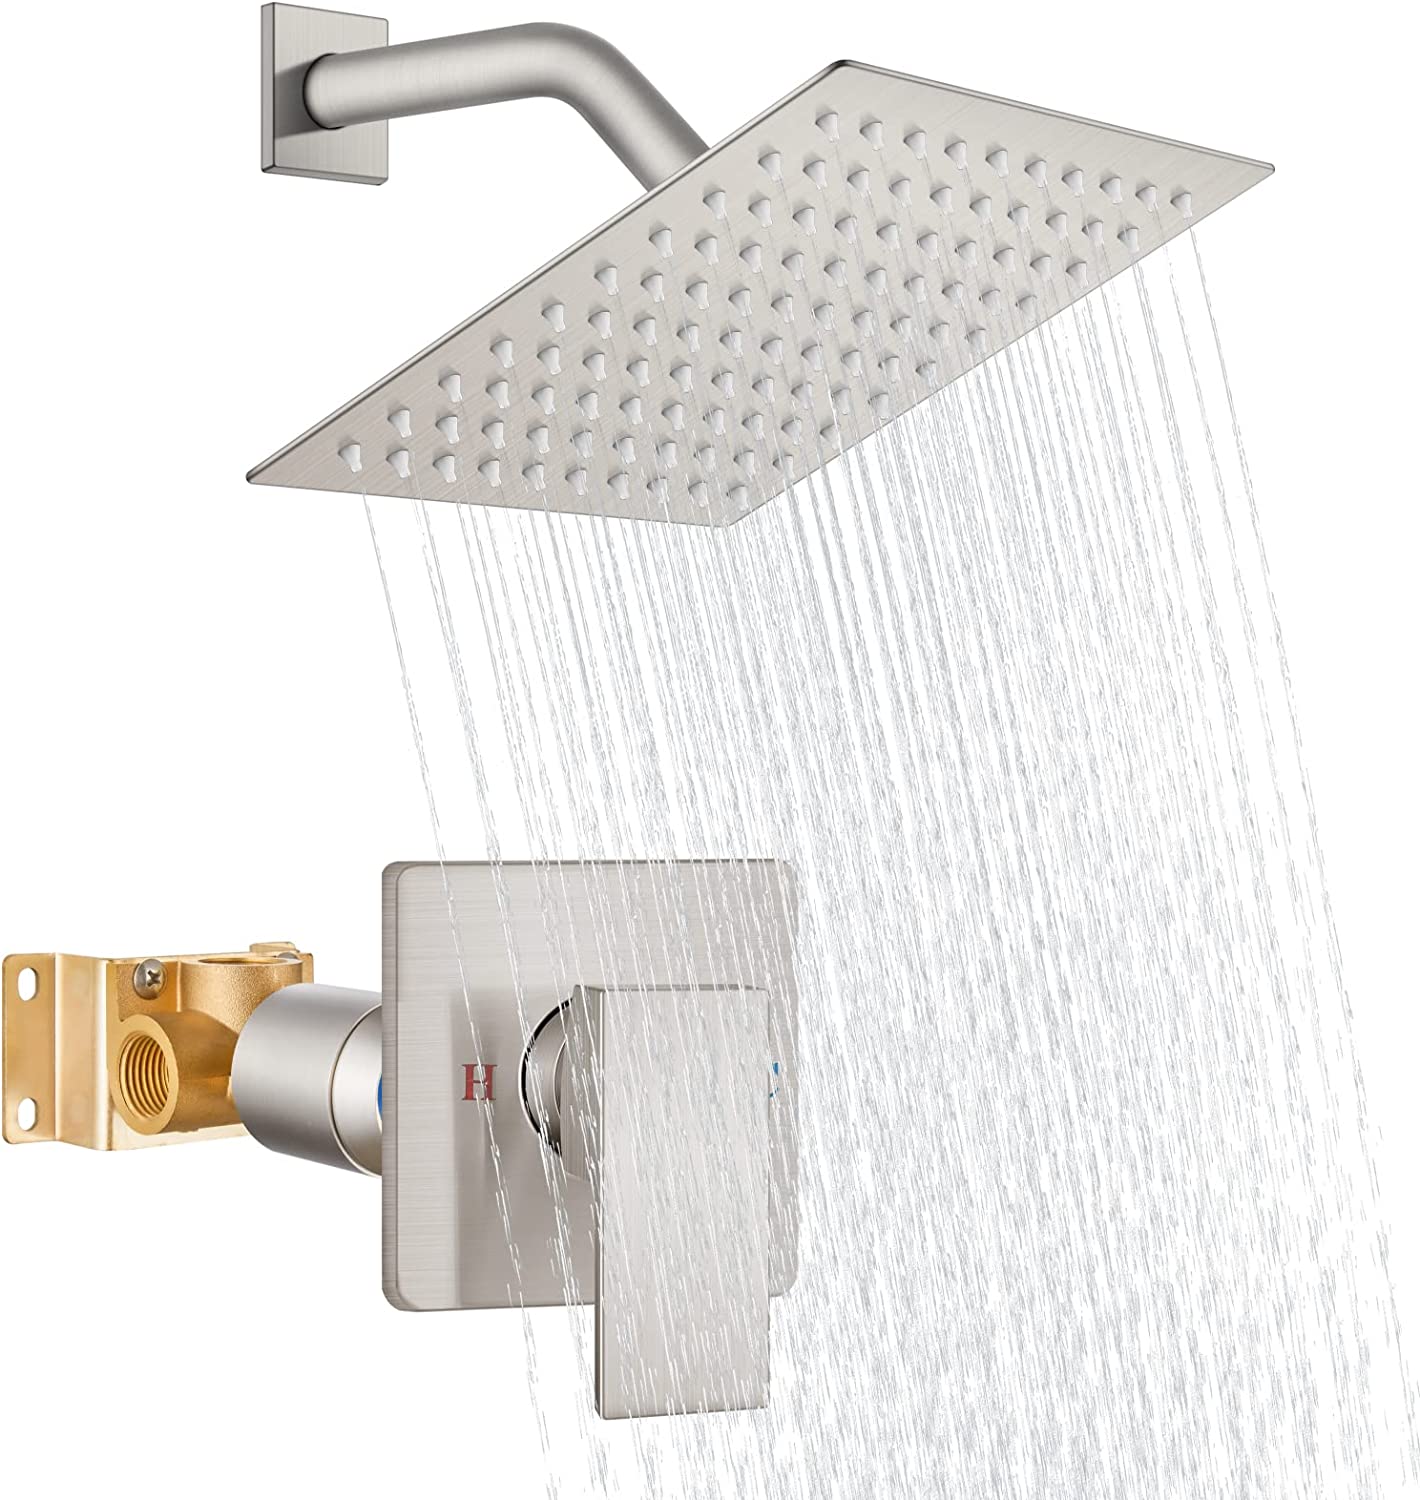 Heyalan Shower Faucet Set Bathroom Rainfall Shower System Square SUS304 Stainless Steel Showerhead Single Function Shower Trim Kit 1 Handle with Rough-in Valve